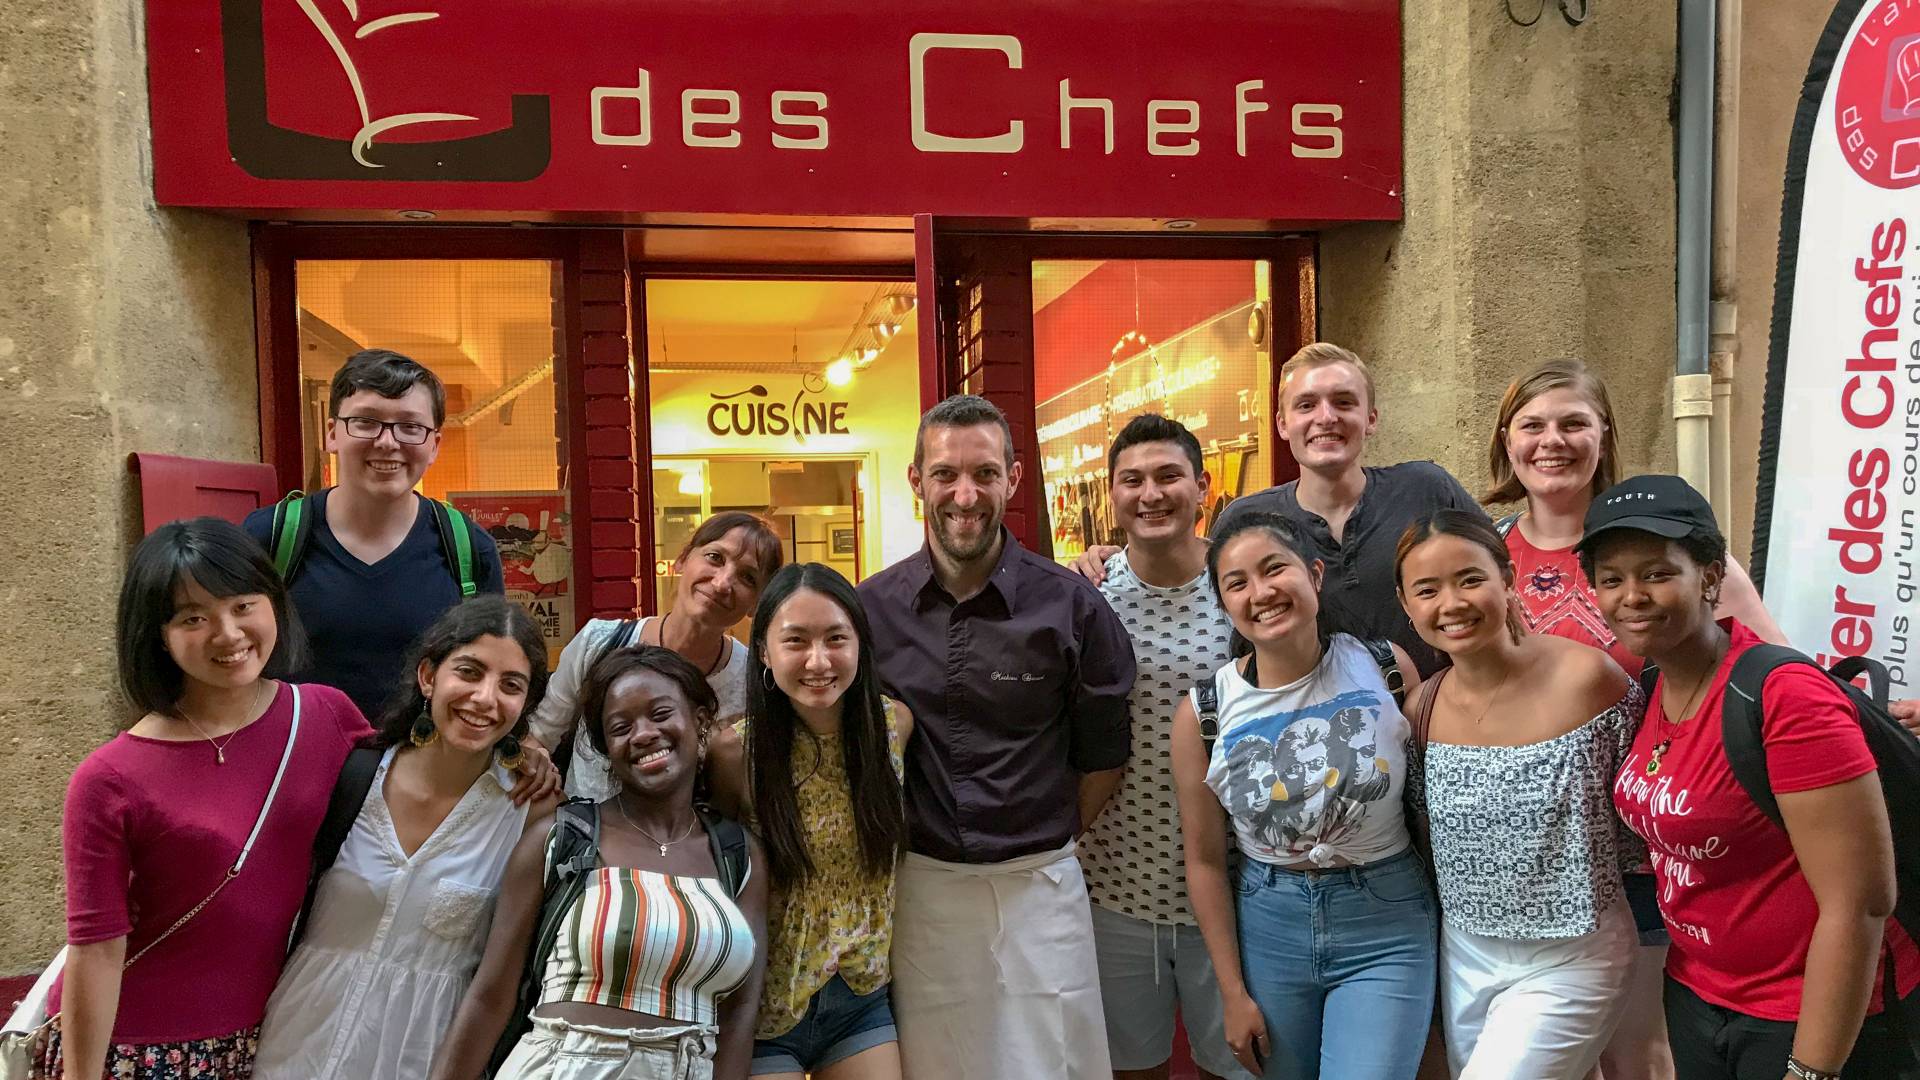 Students and chef posing outside cafe in France